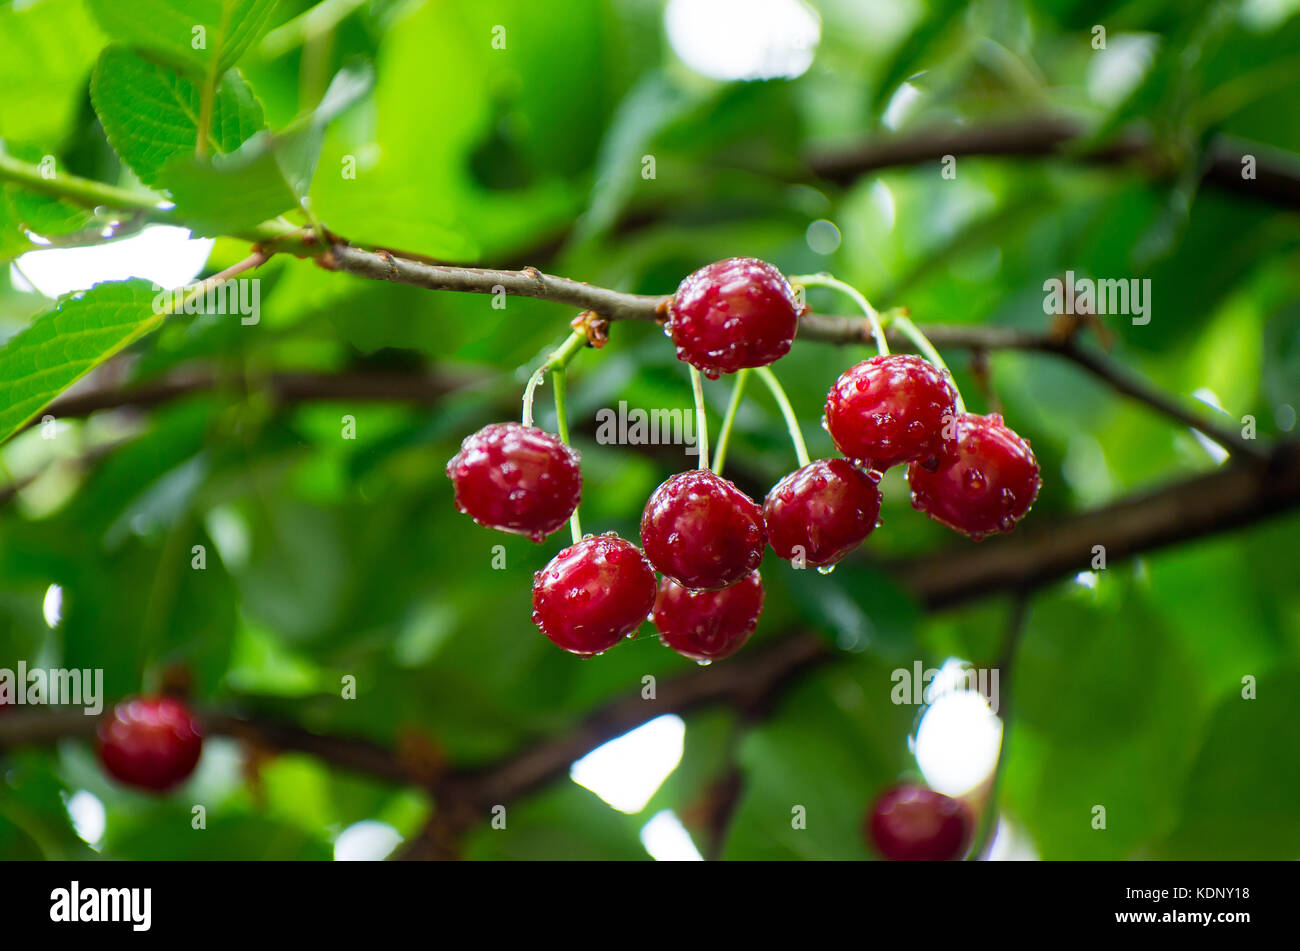 Red and sweet cherries on a branch after rain Stock Photo